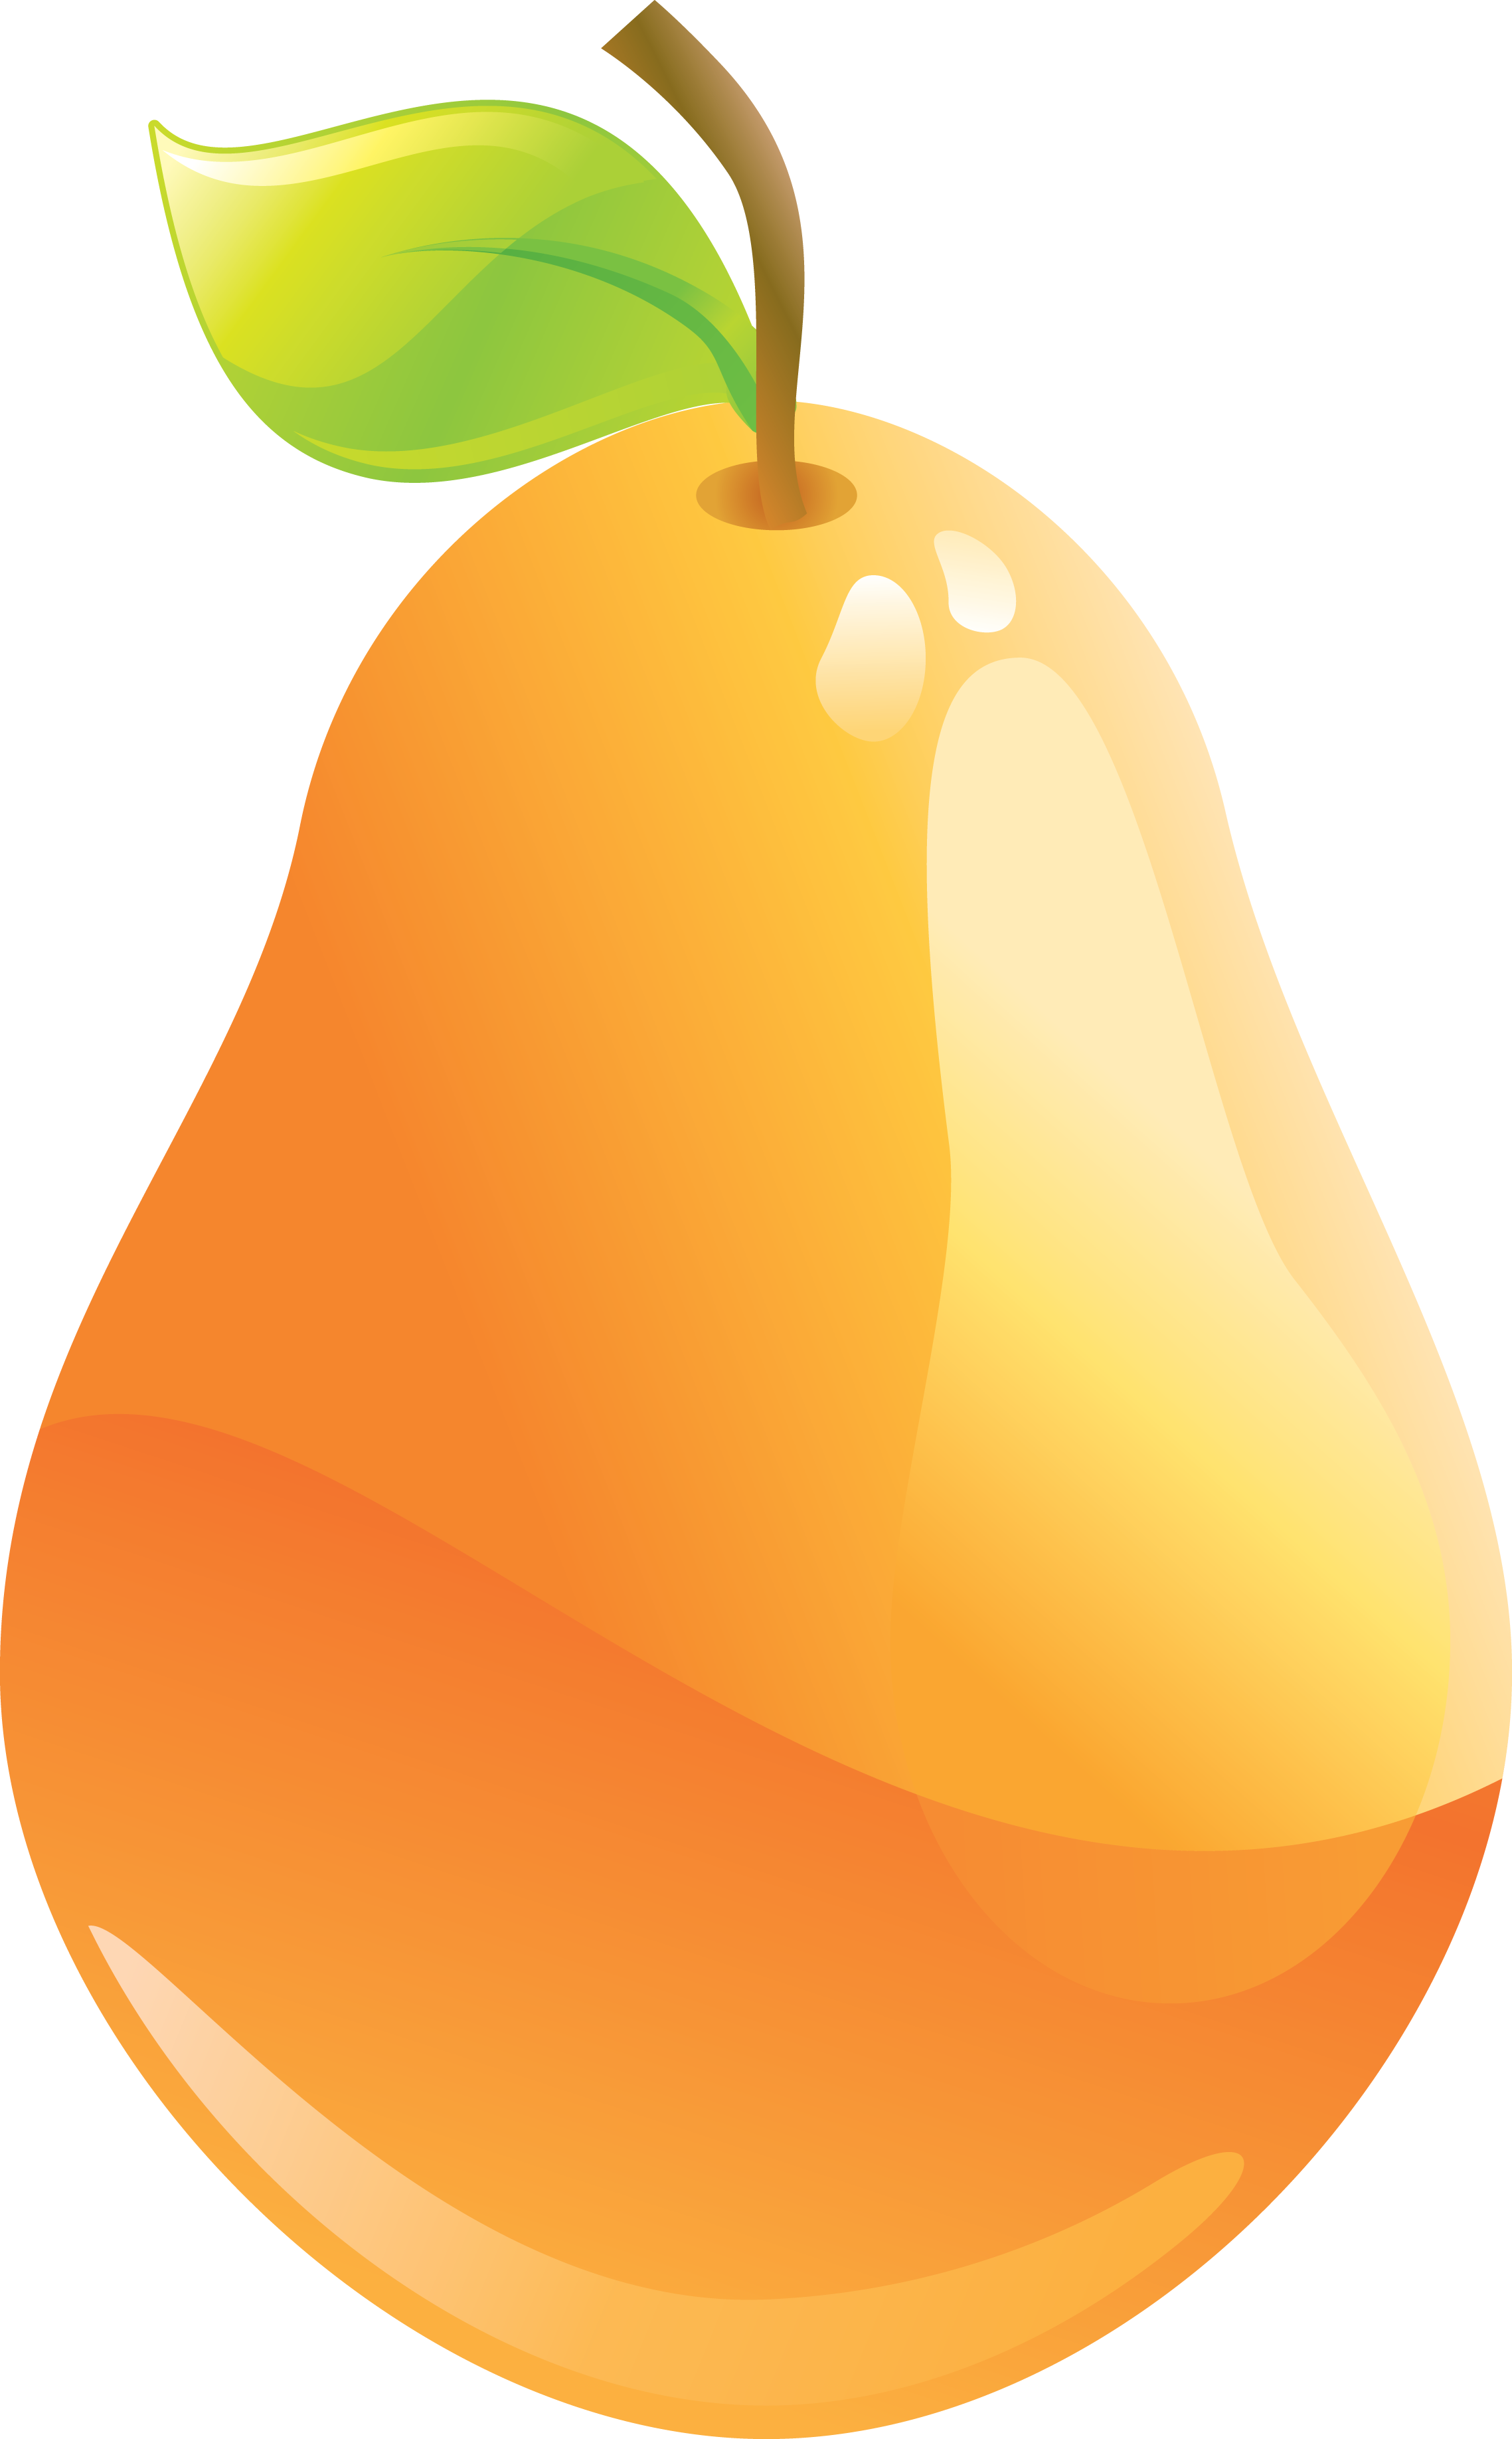 Pear PNG - 8930